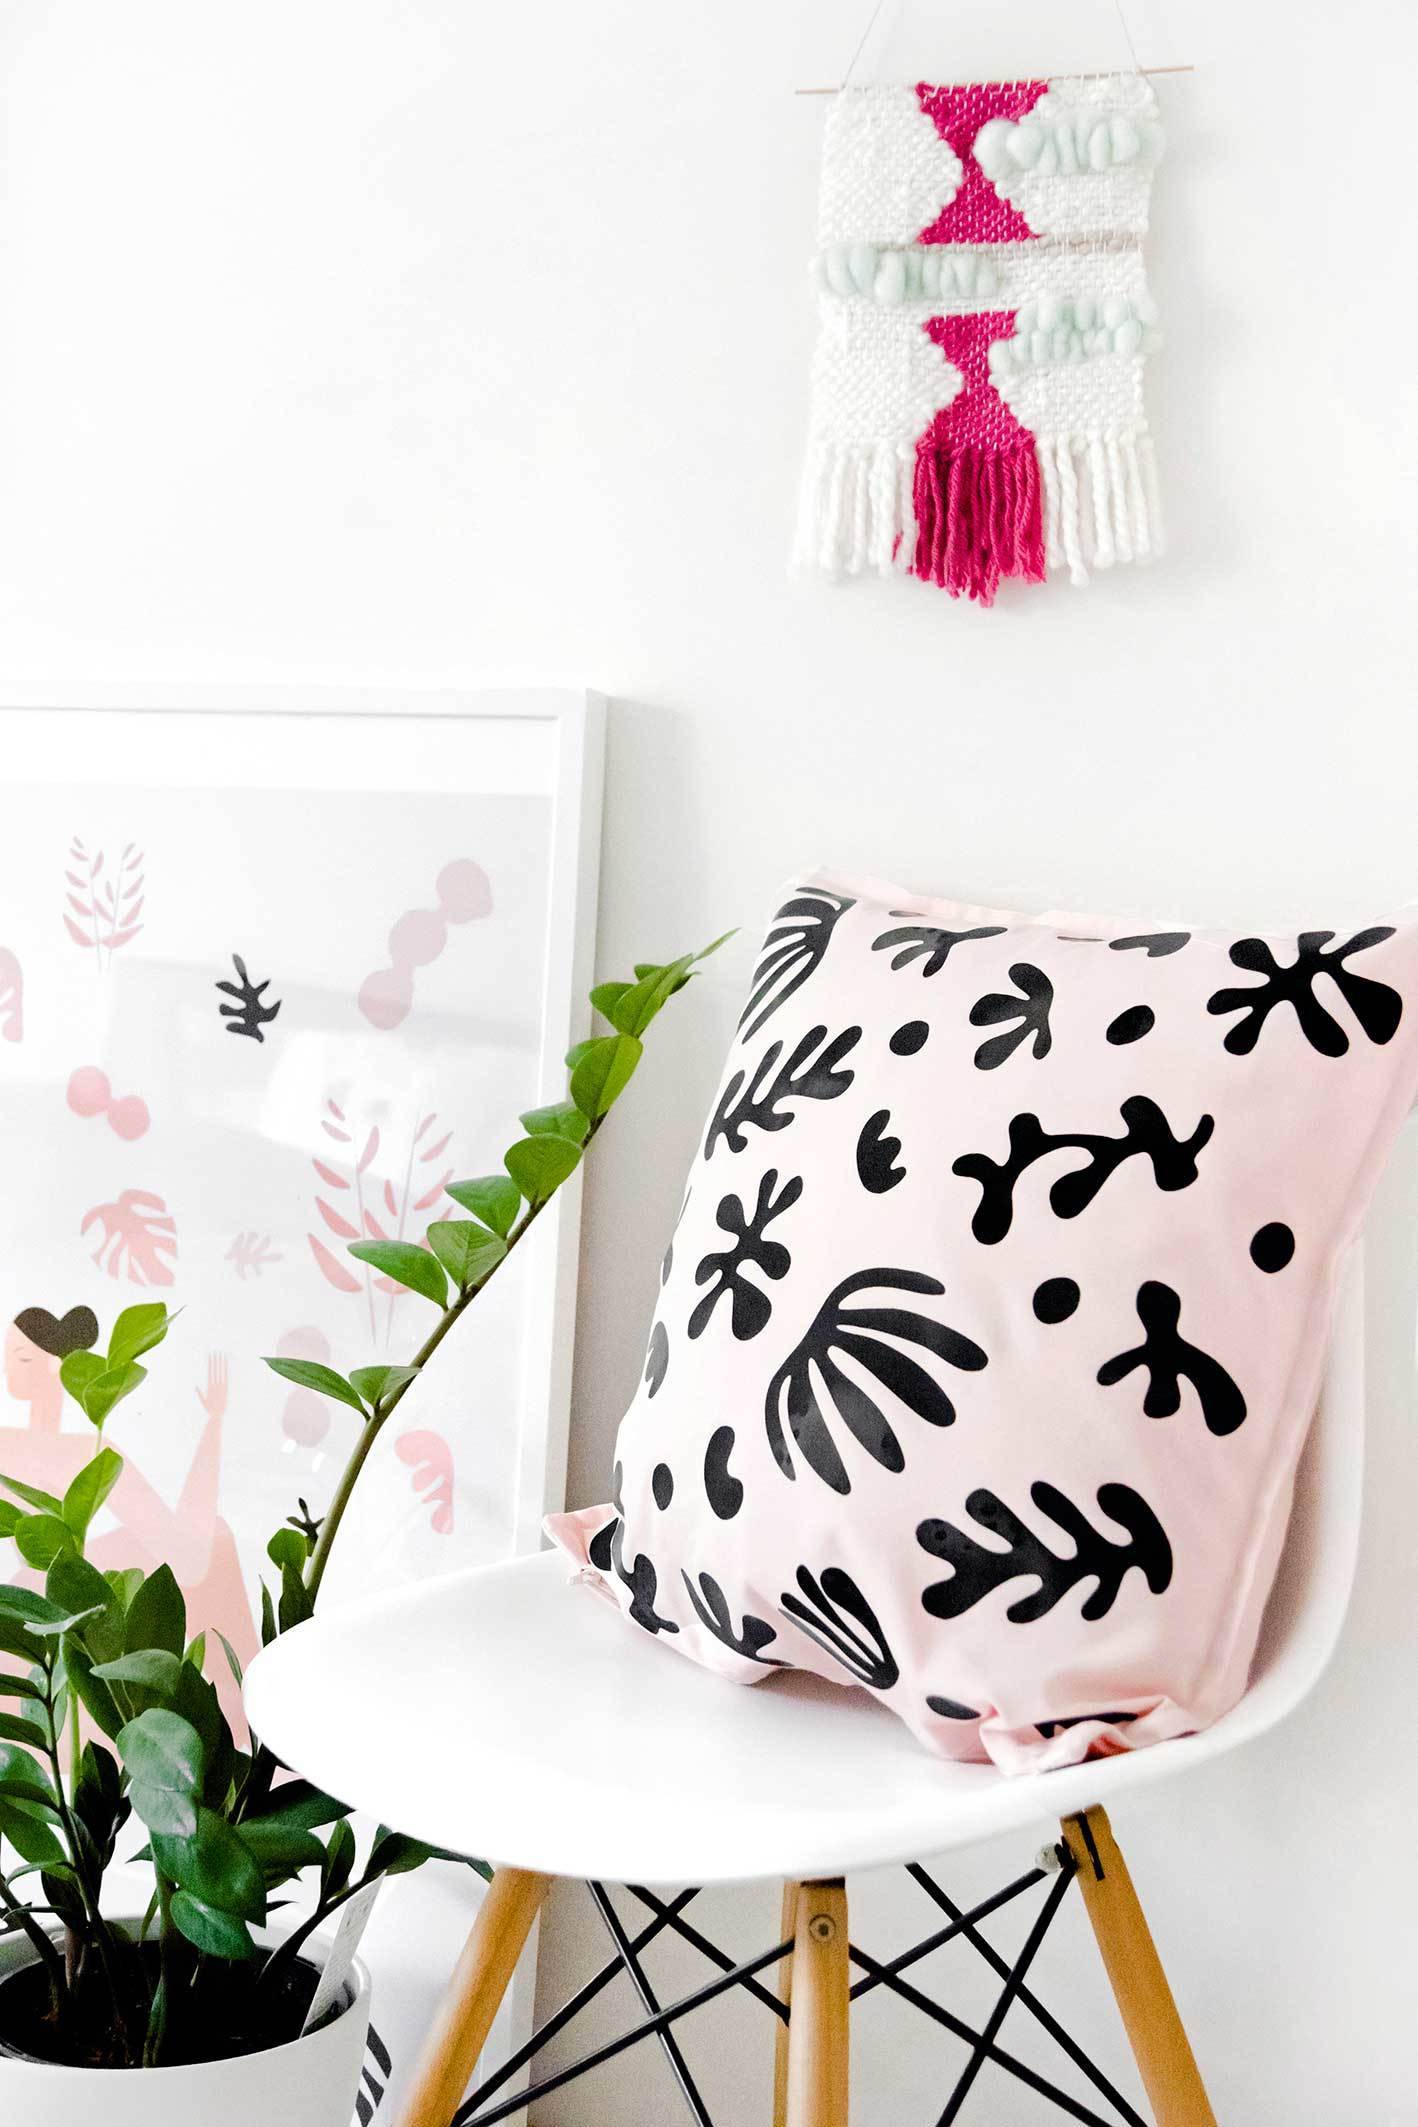 A pink pillow with funky black vinyl decals